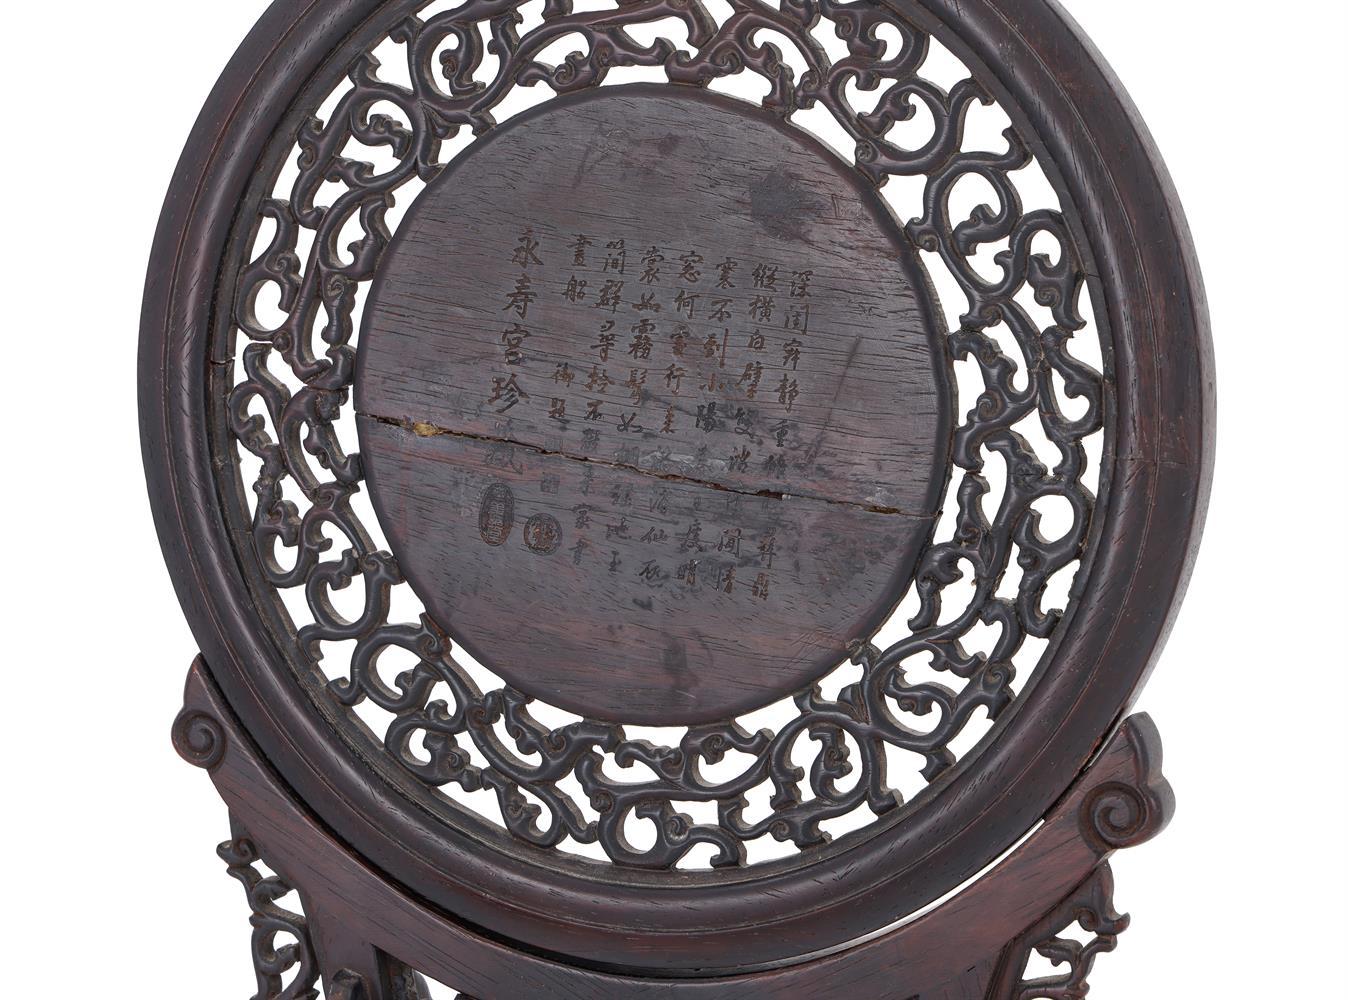 A Chinese jade inlaid carved hardwood table screen - Image 4 of 5